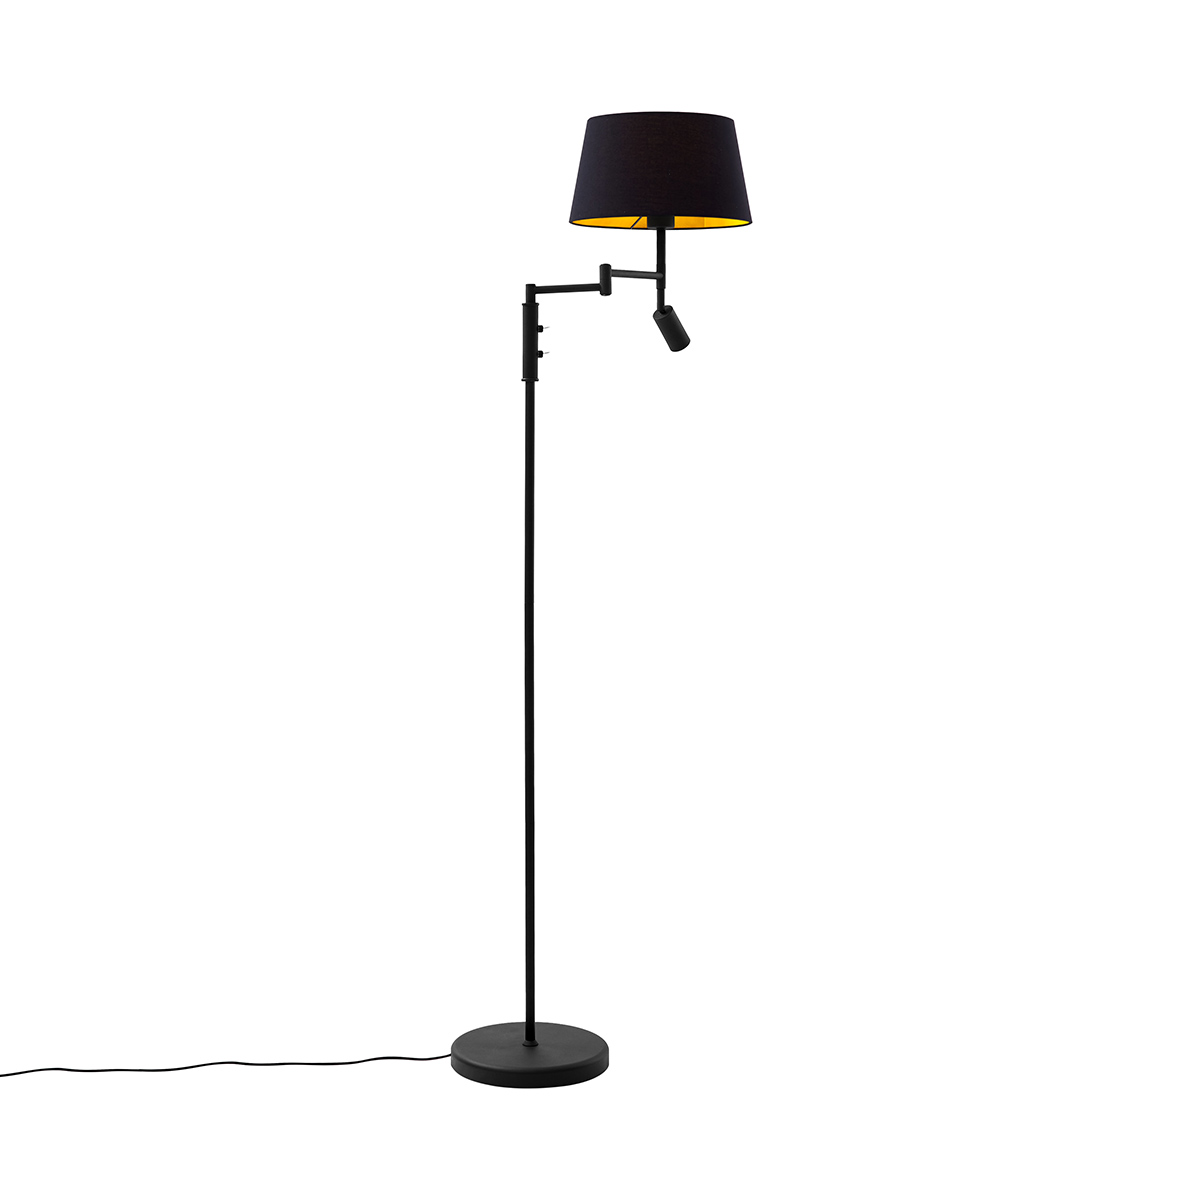 Black floor lamp with black shade and adjustable reading lamp - Ladas